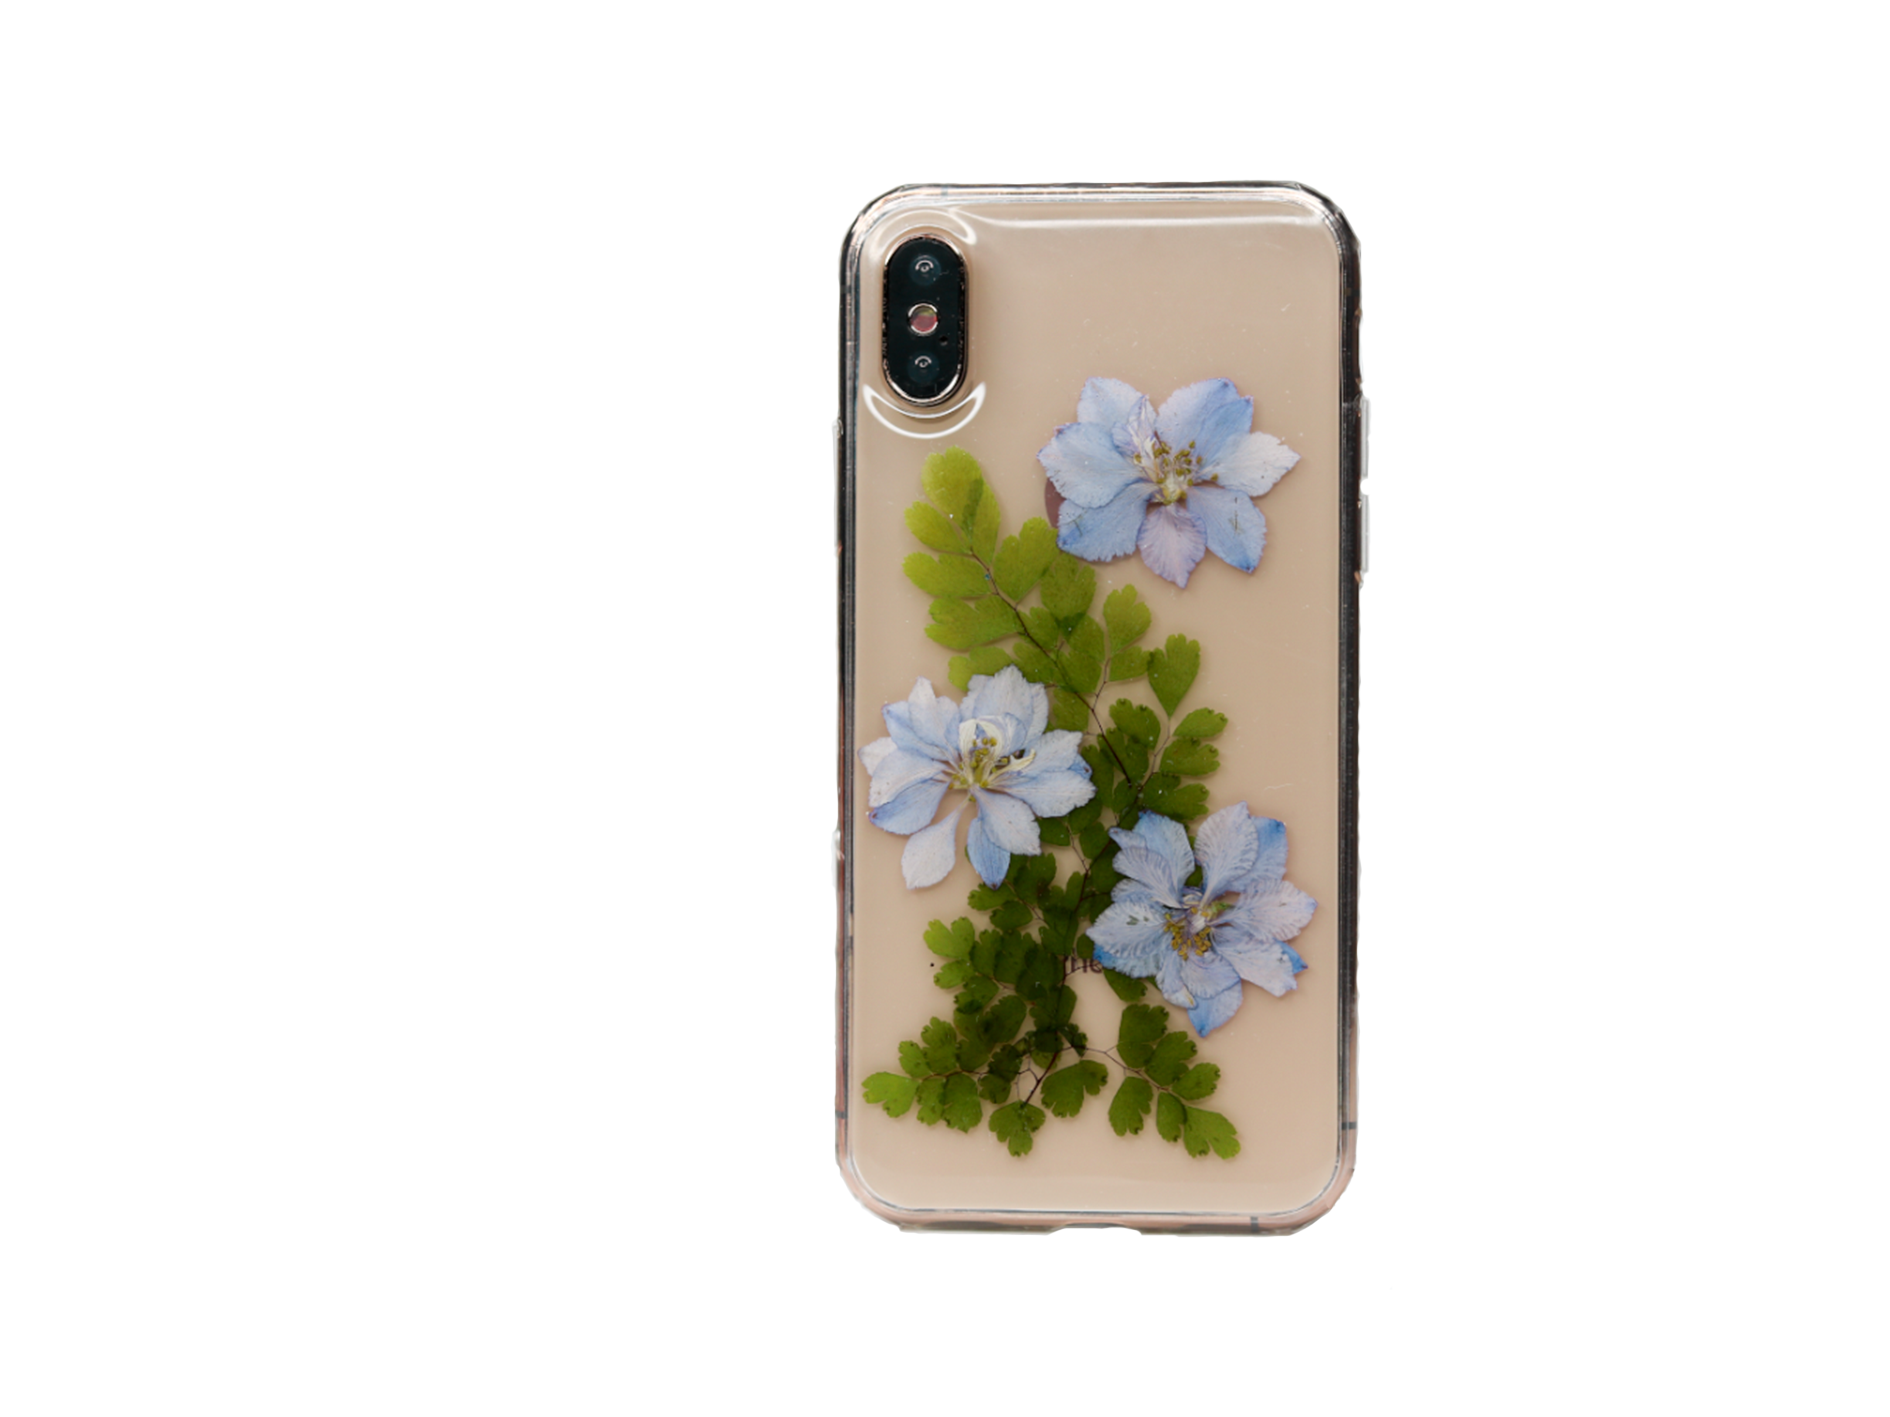  Real Pressed Blue Flowers Phone Case, Violets , Samsung Galaxy S10 S9 S8, iphone case, iphone 6 6s 7 8 plus x xr xs 11 12 13 pro max case